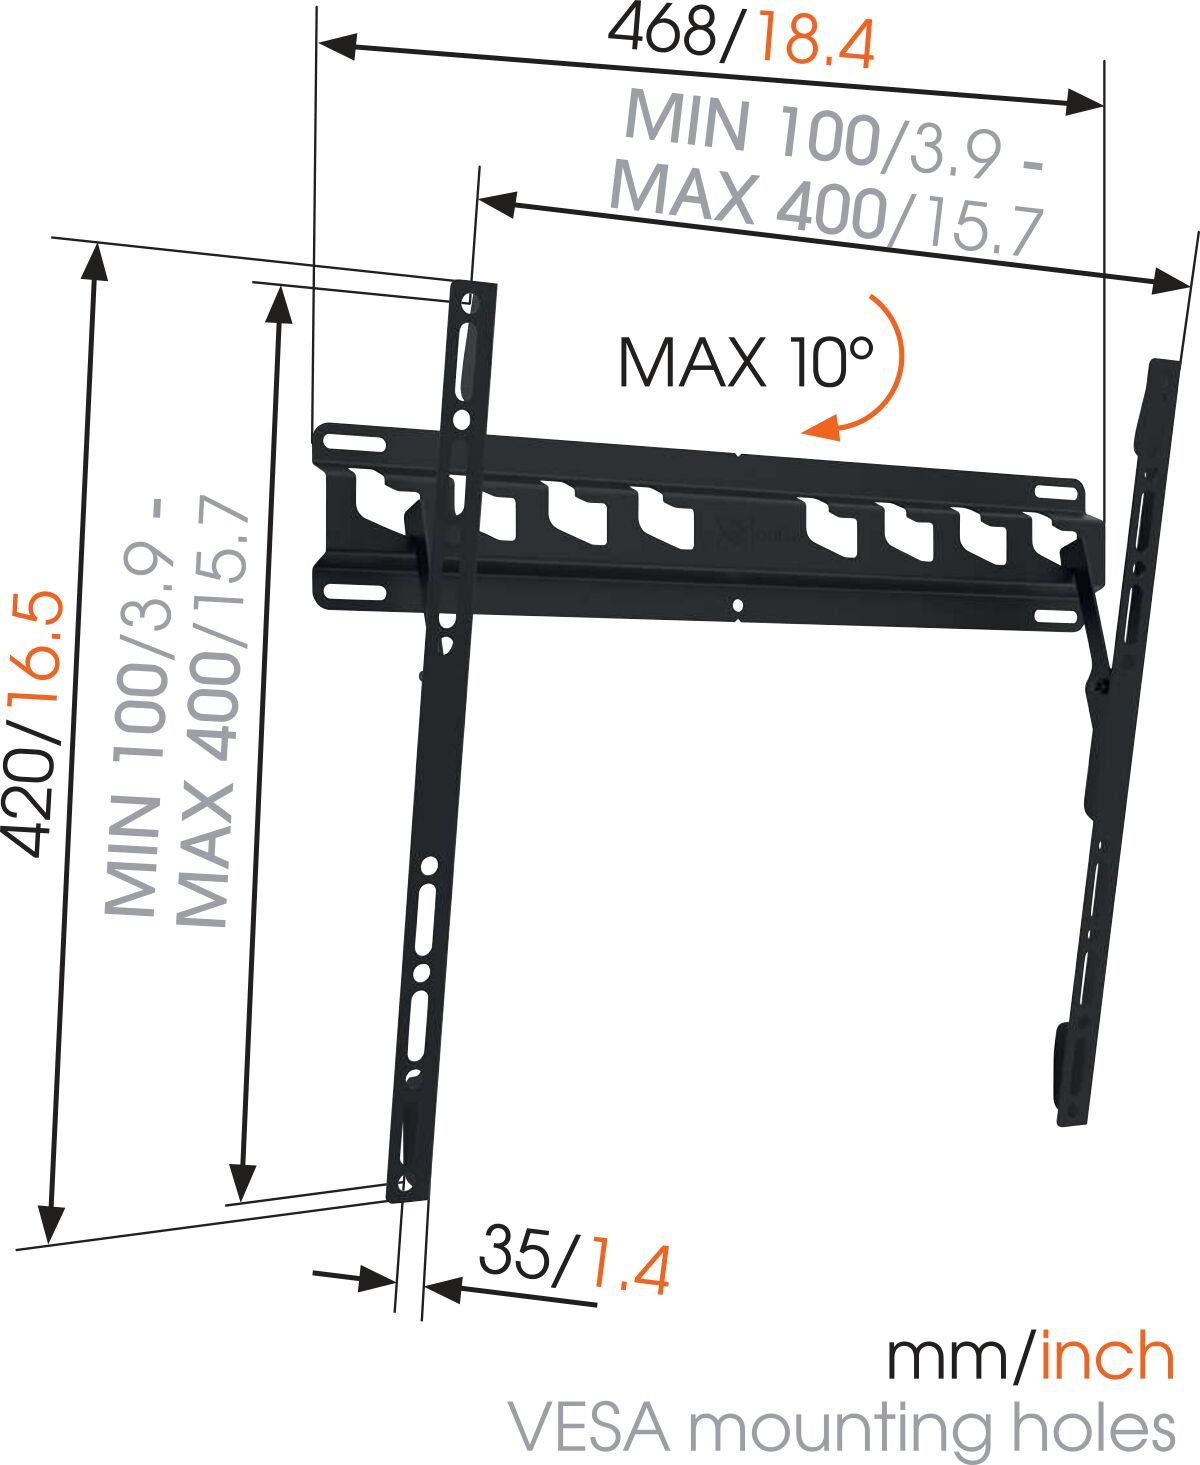 Vogel's MA 3010 Tilting TV Wall Mount - Suitable for 32 up to 65 inch TVs up to Tilt up to 10° - Dimensions